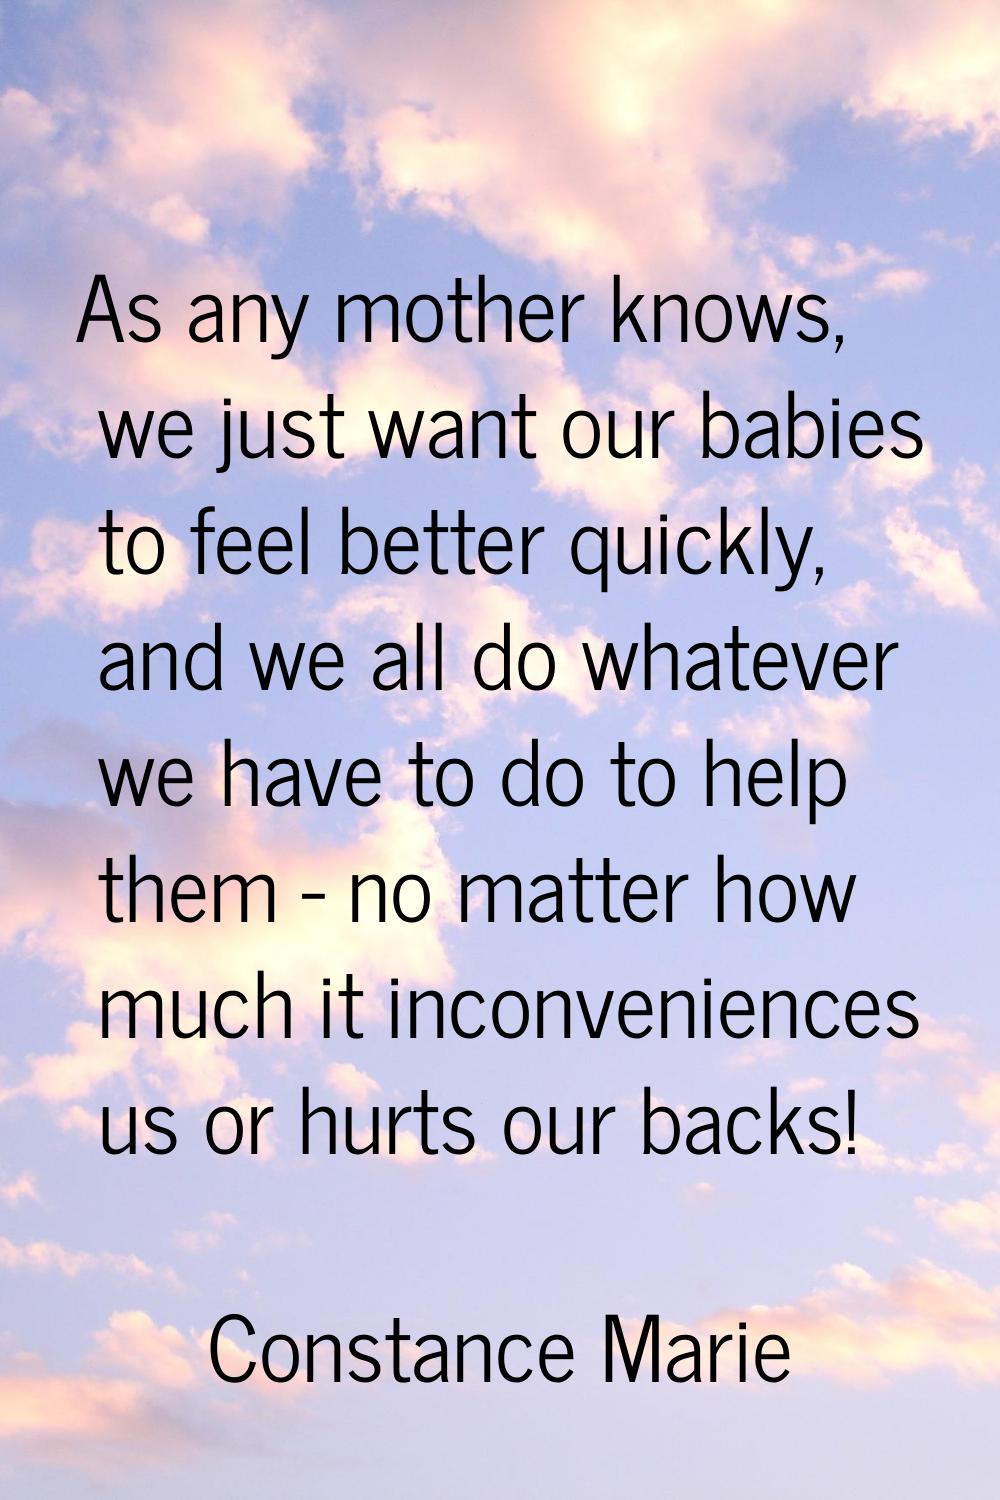 As any mother knows, we just want our babies to feel better quickly, and we all do whatever we have